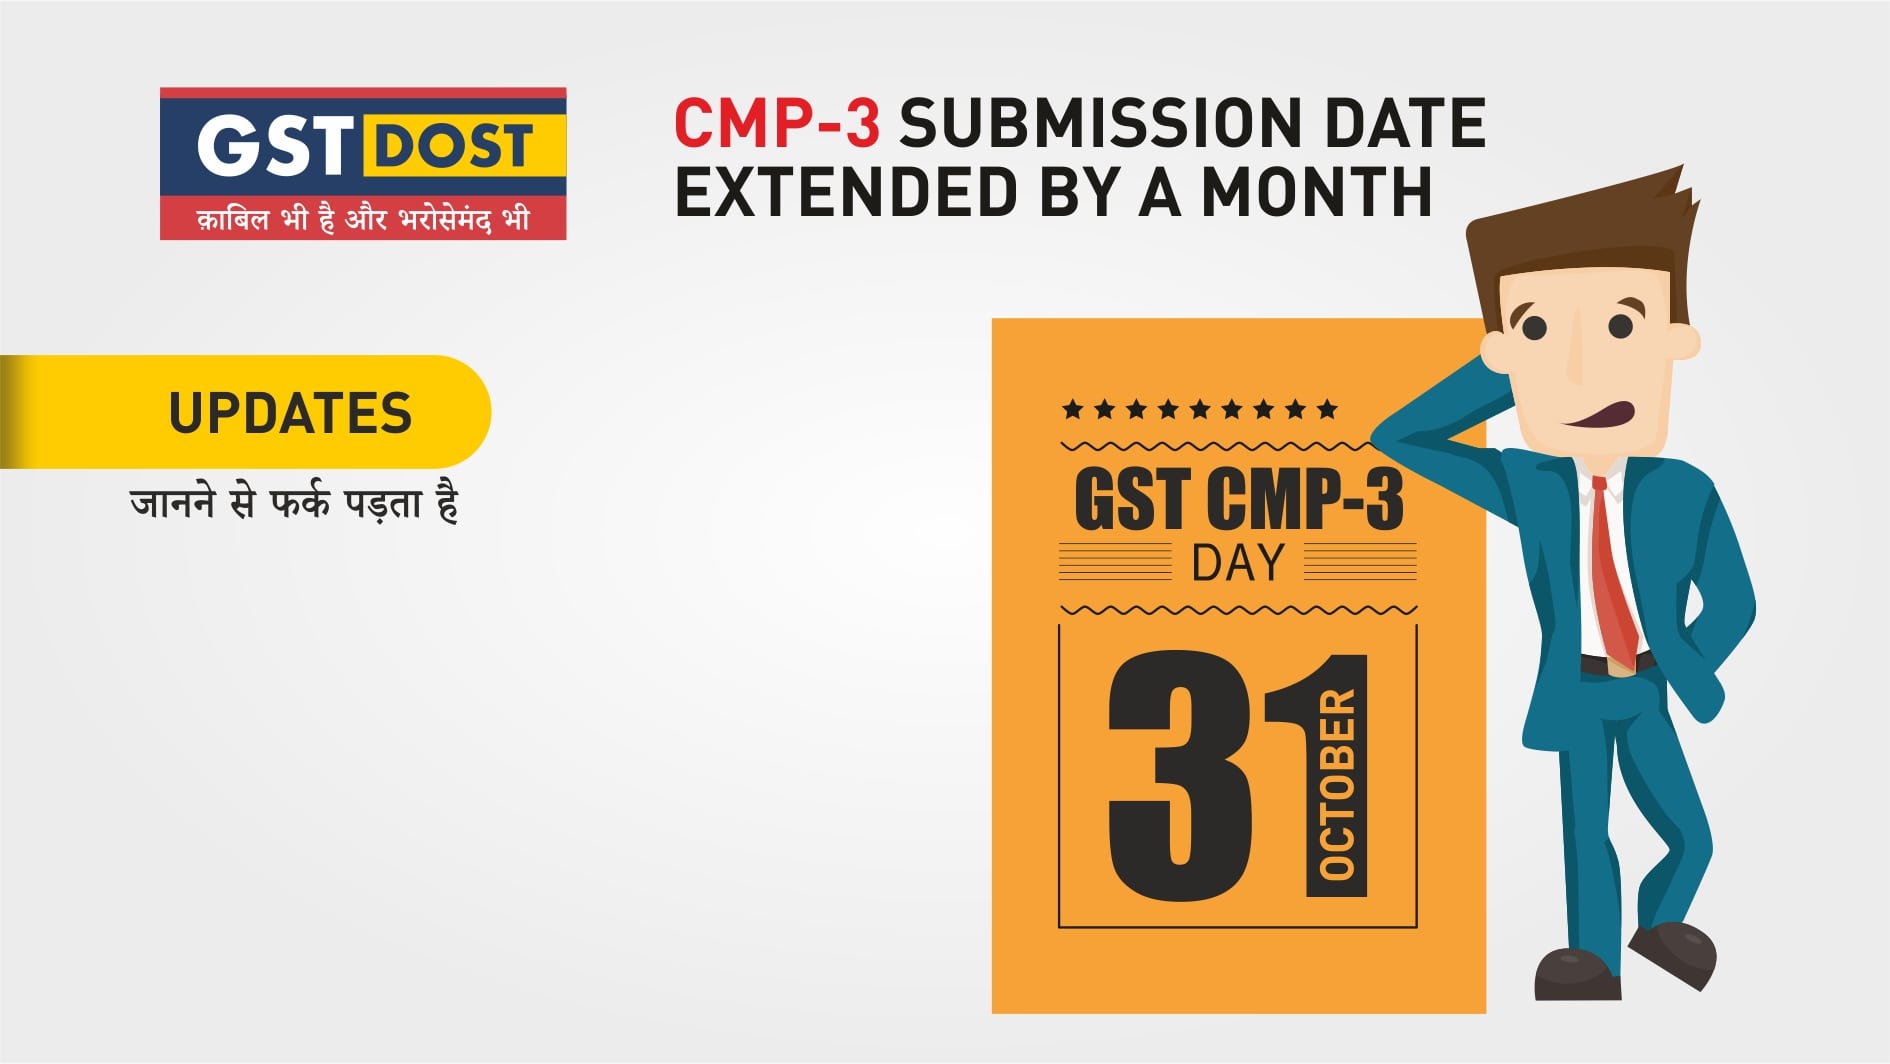 CMP-3 Submission Date Extended by a Month